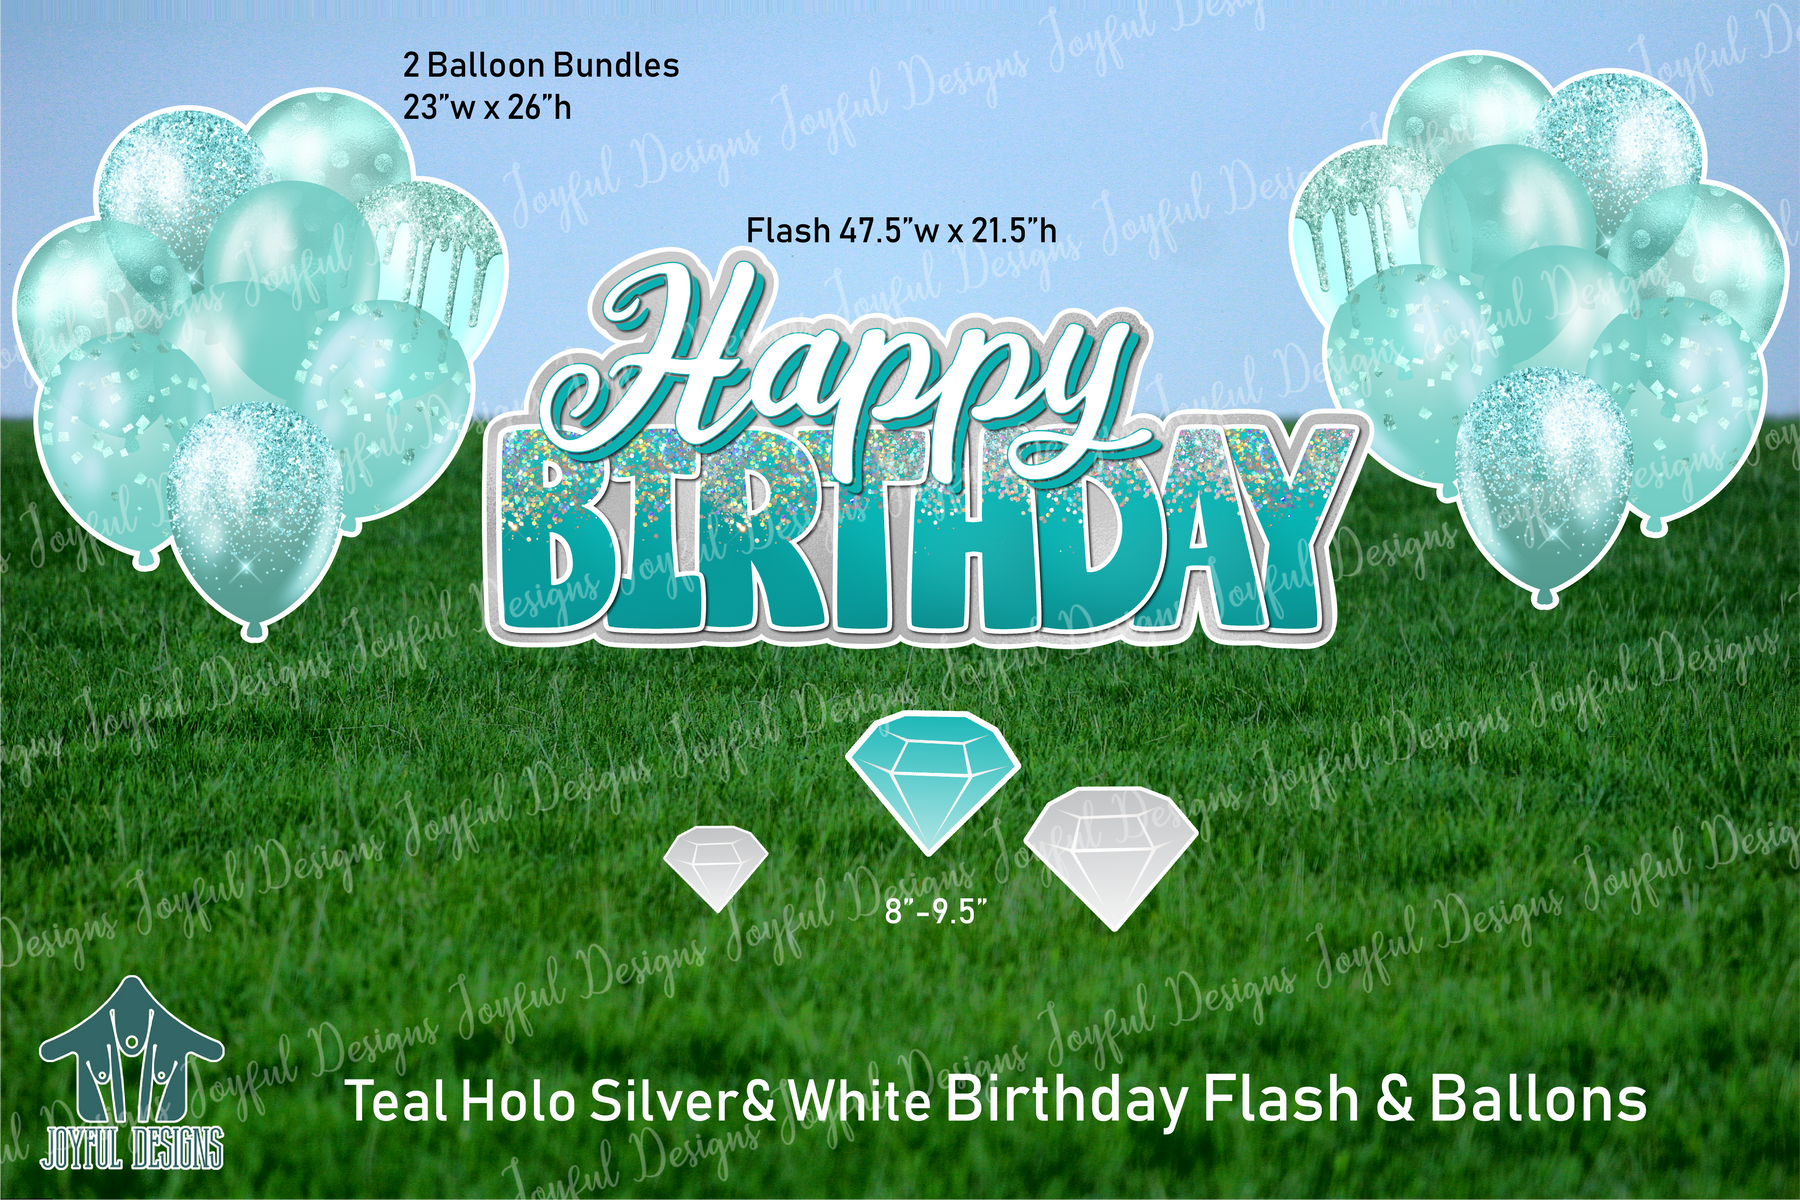 Teal Holo Silver and White "One and Done" Birthday Set